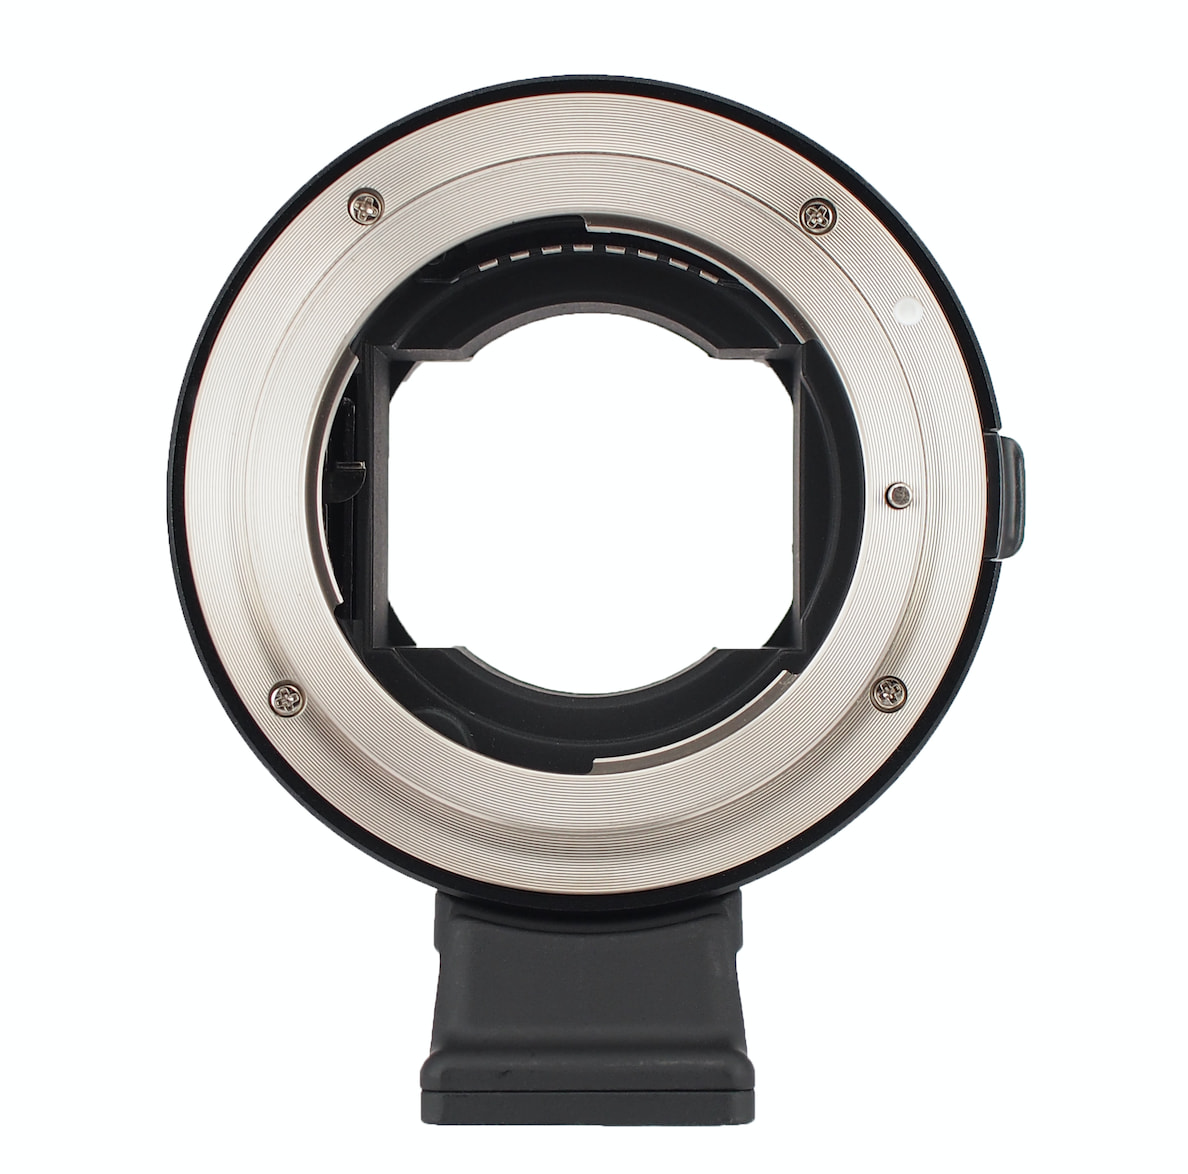 Neufday Auto Focus Mount Adapter for Nikon F Lens for Sony E-Mount Mirrorless Camera 